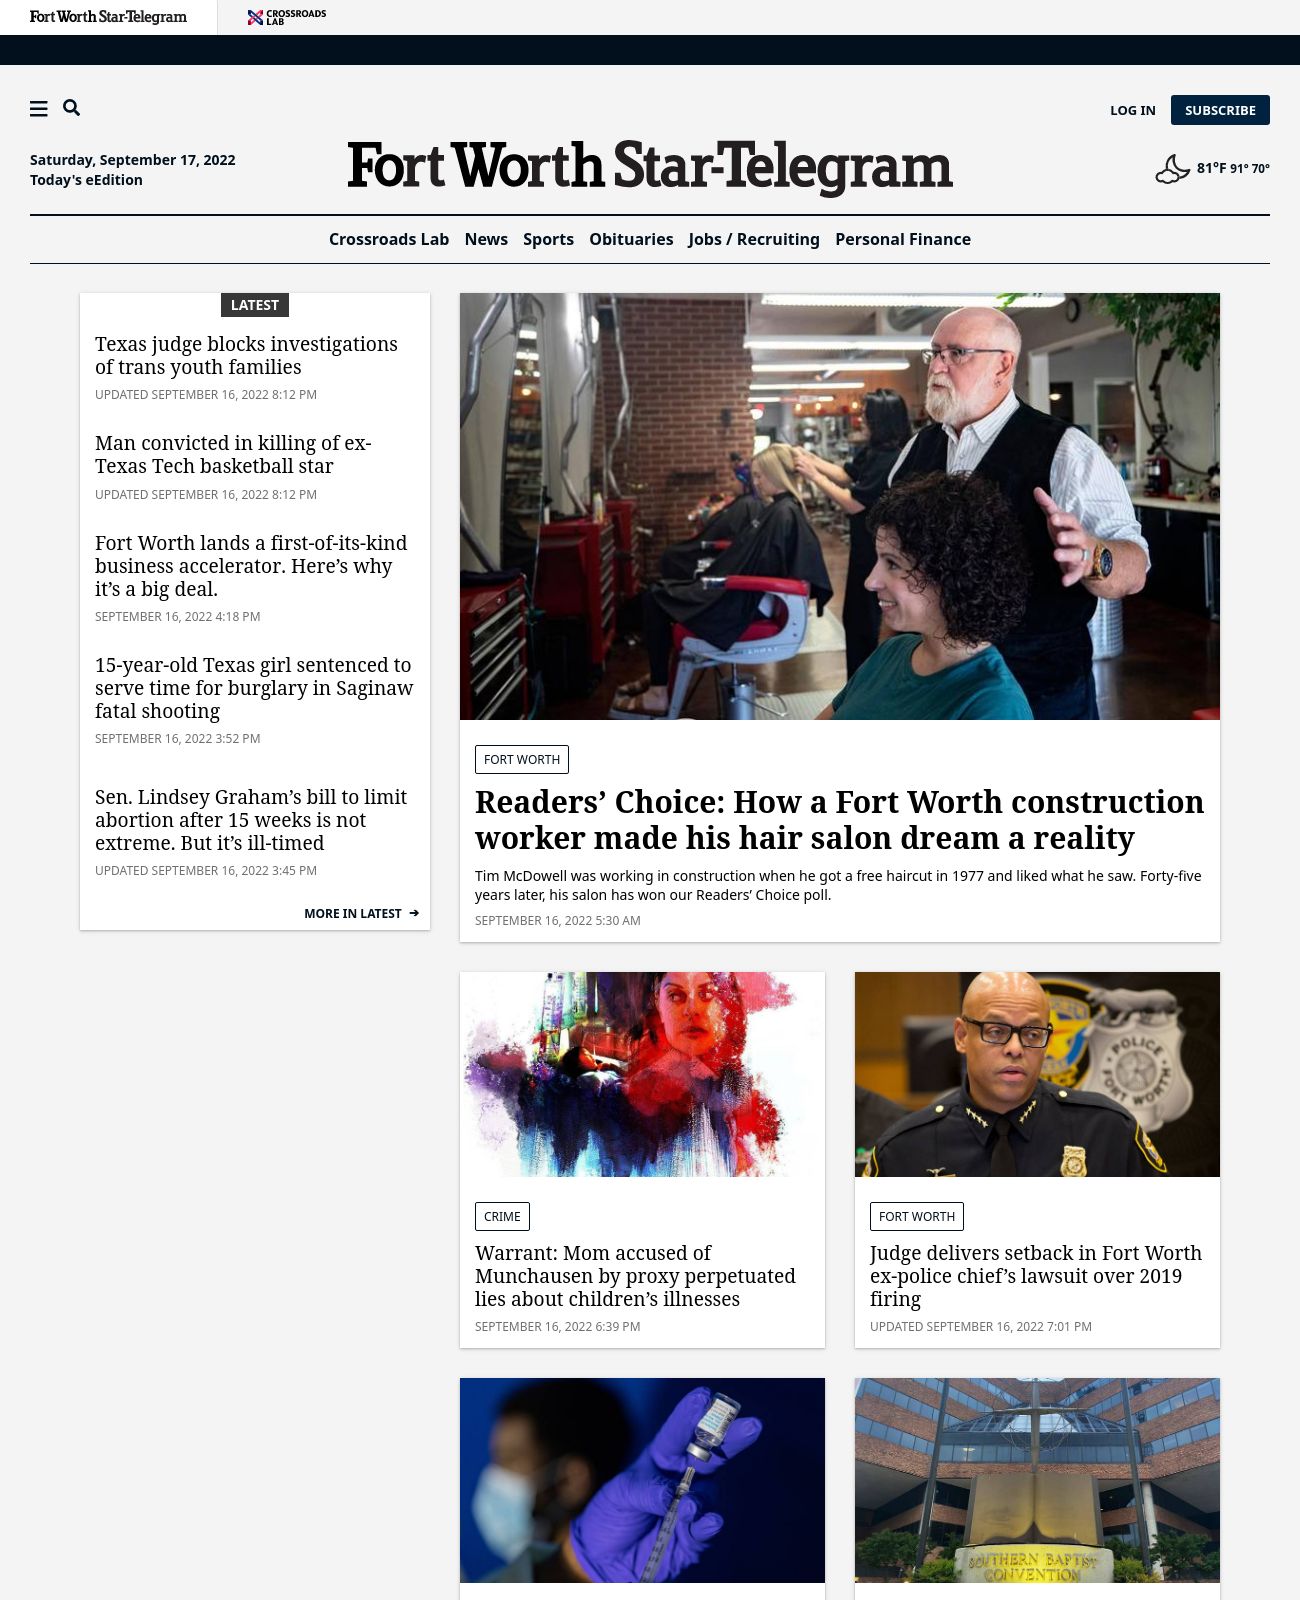 Fort Worth Star-Telegram at 2022-09-17 00:23:48-05:00 local time